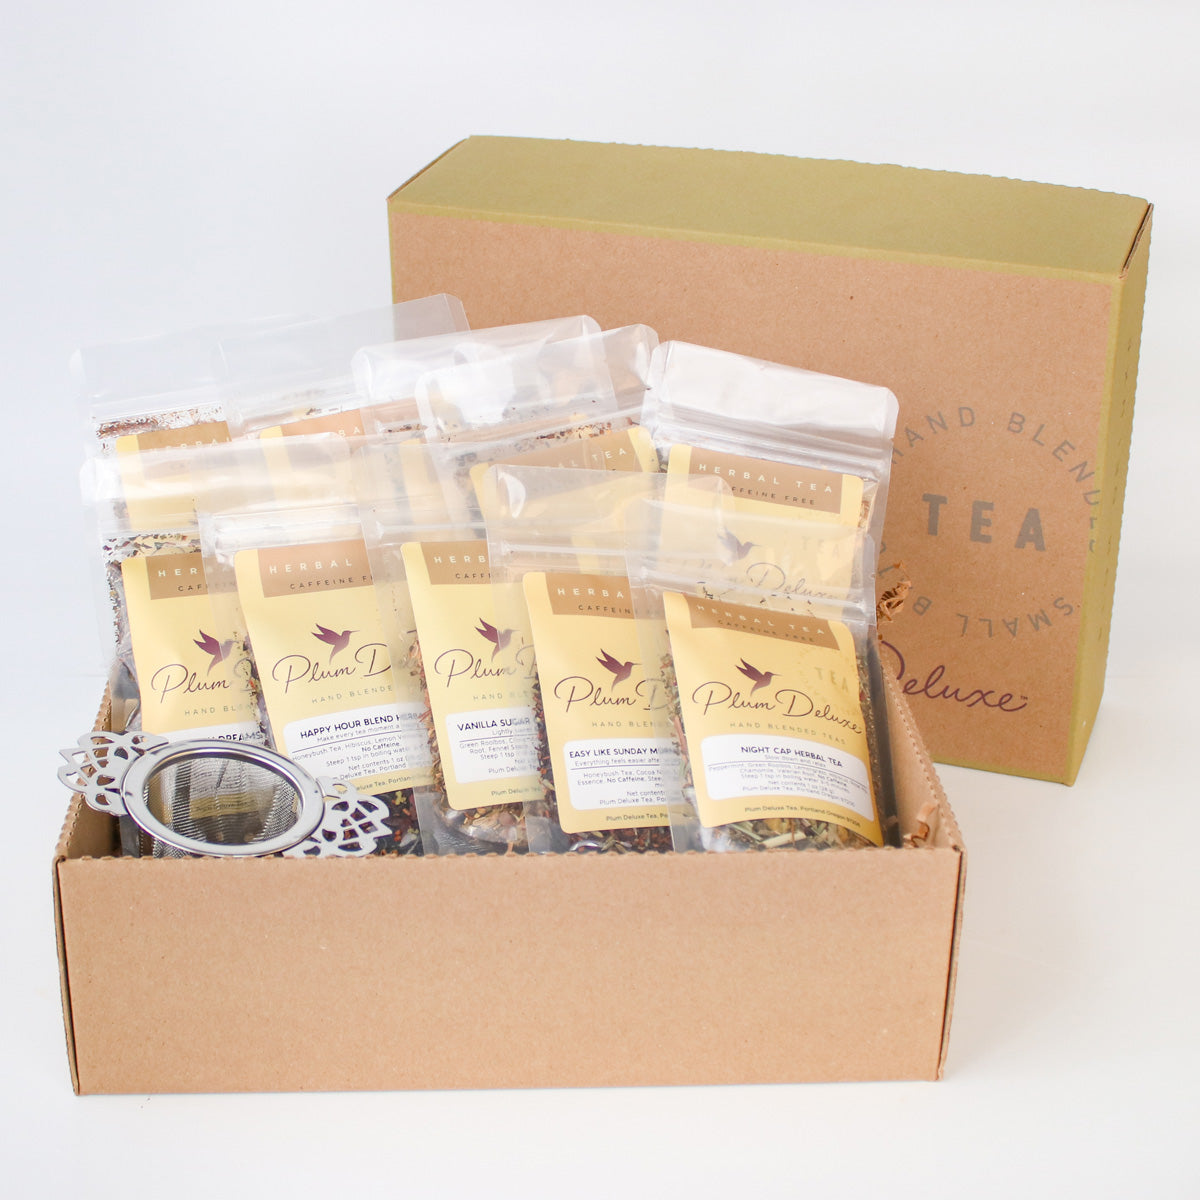 Deluxe Tea Box (10 Teas + Infuser) by Plum Deluxe Tea - Lotus and Willow